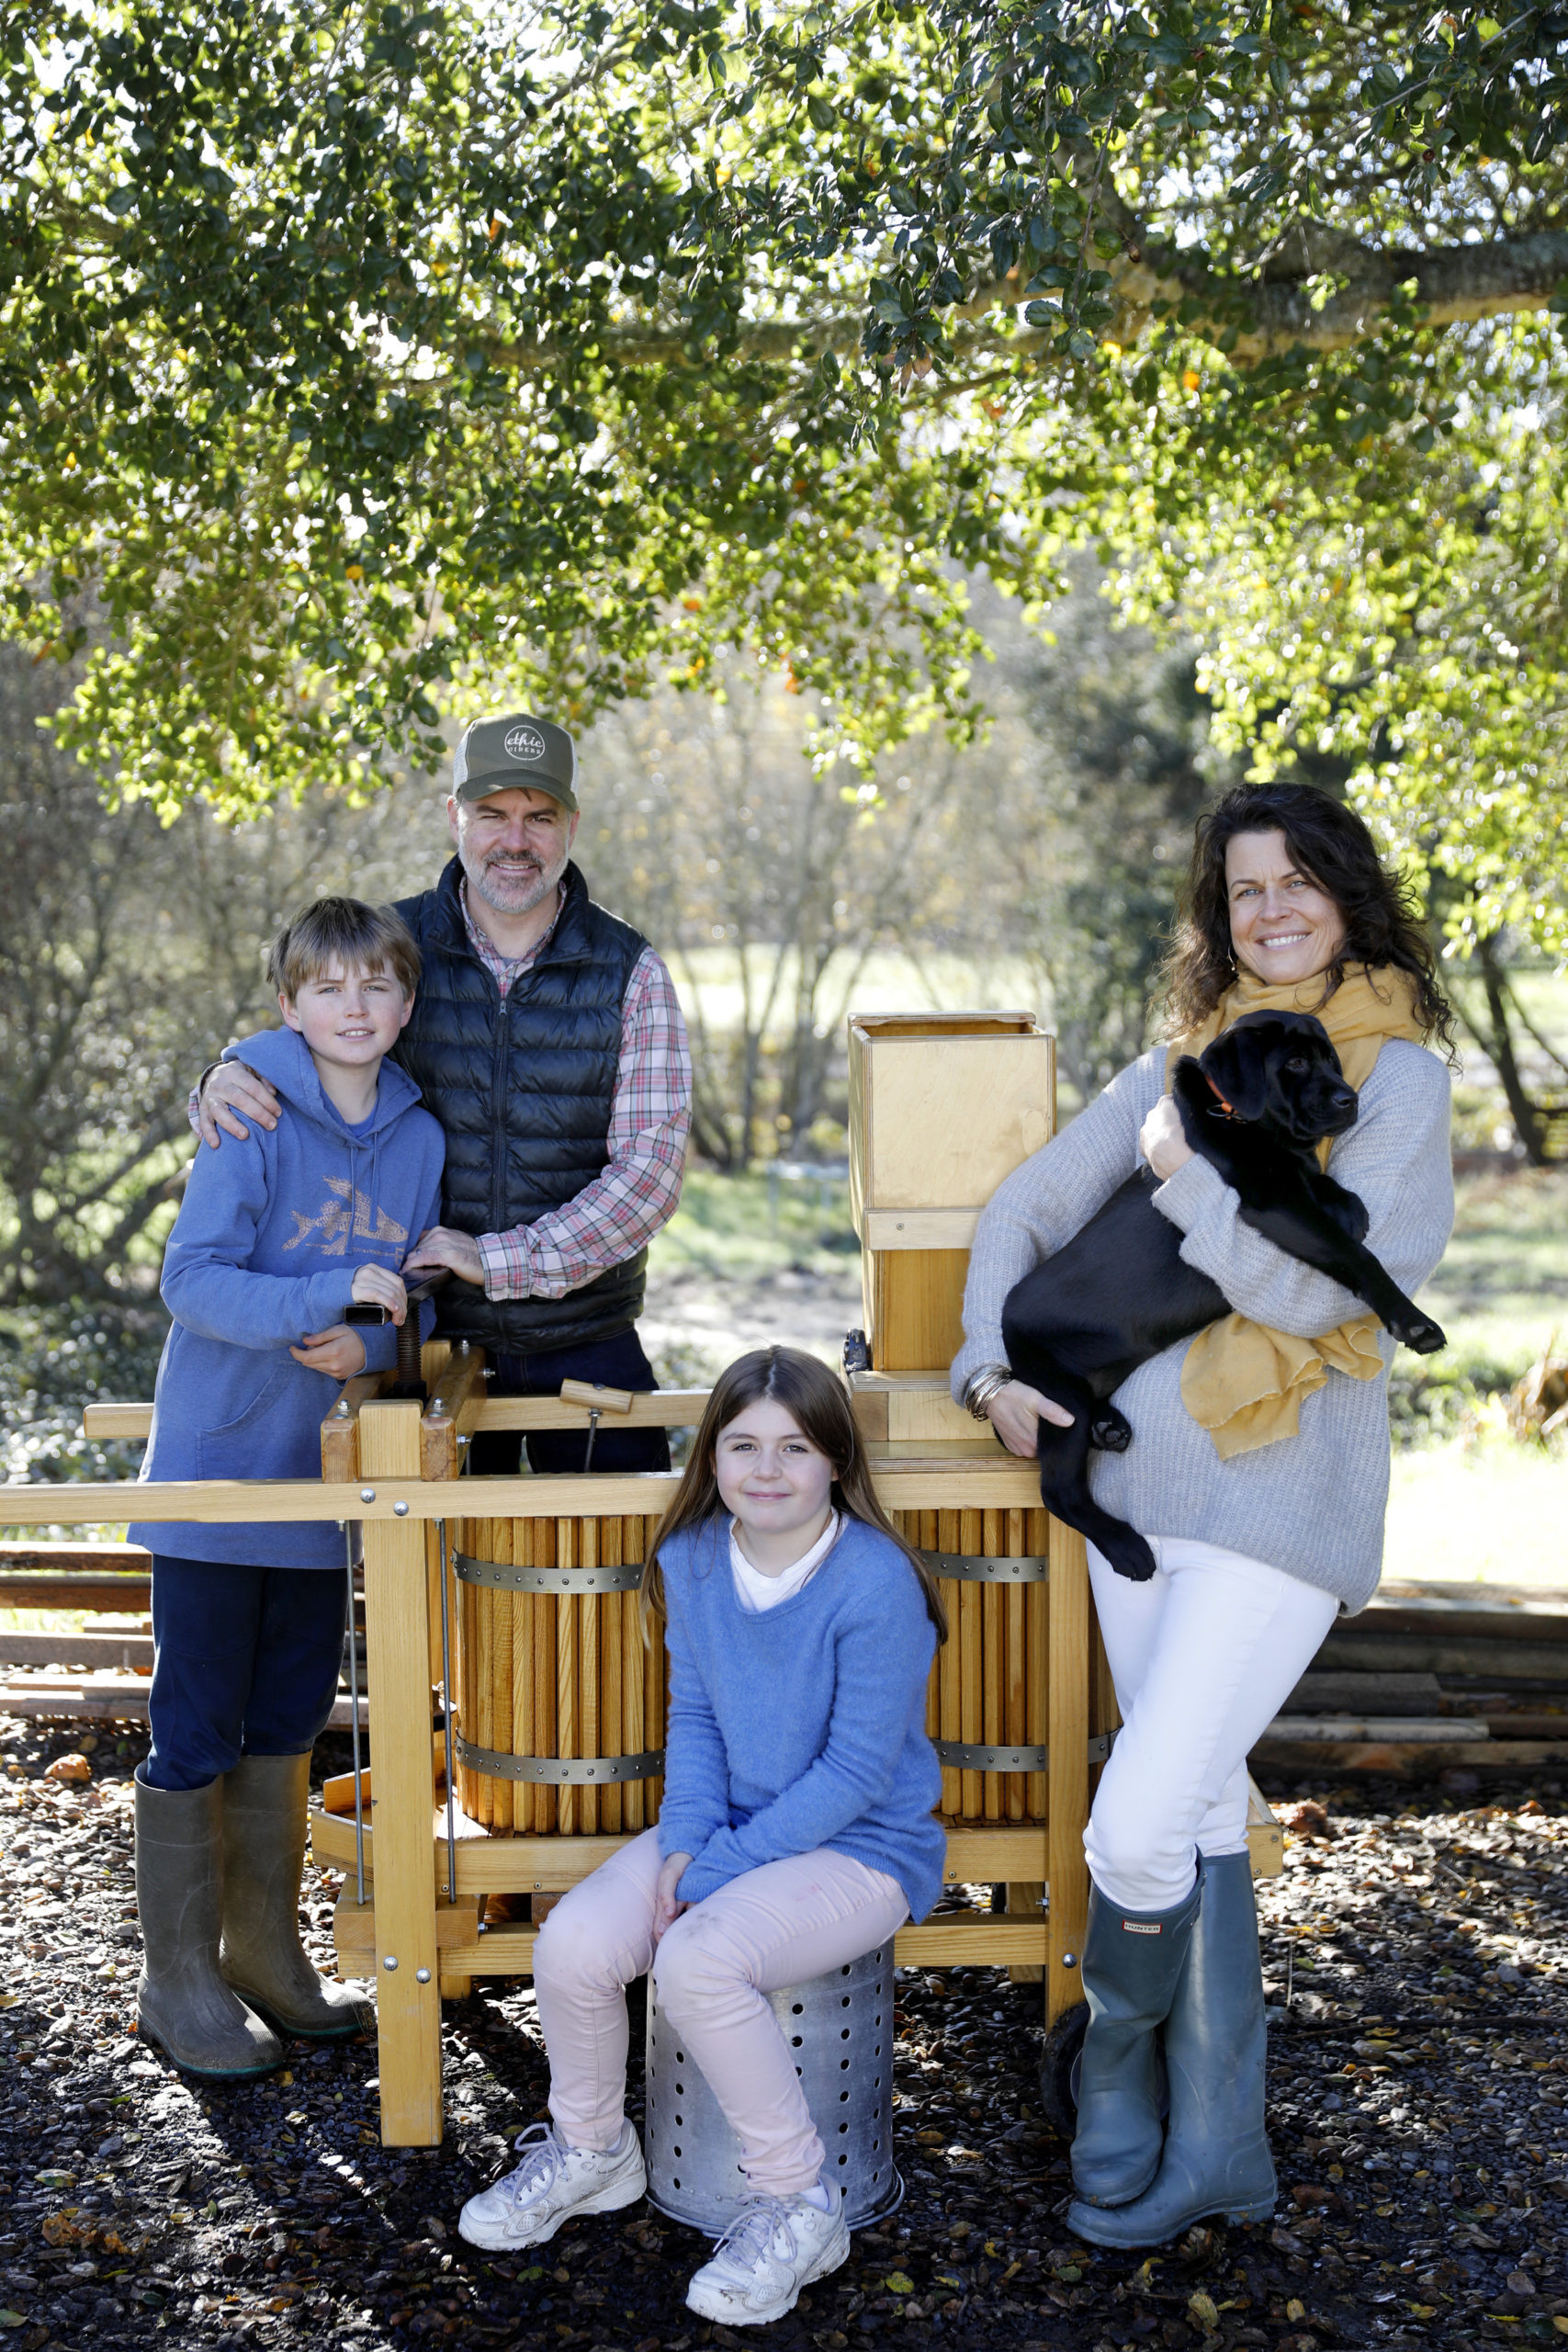 Ethic Ciders owners Ned and Michelle Lawton, their son Kielson, 12, daughter Remi, 9, and puppy, Luna, stand next to an apple press at their apple farm on Wednesday, December 26, 2018 in Sebastopol, California . (BETH SCHLANKER/The Press Democrat)